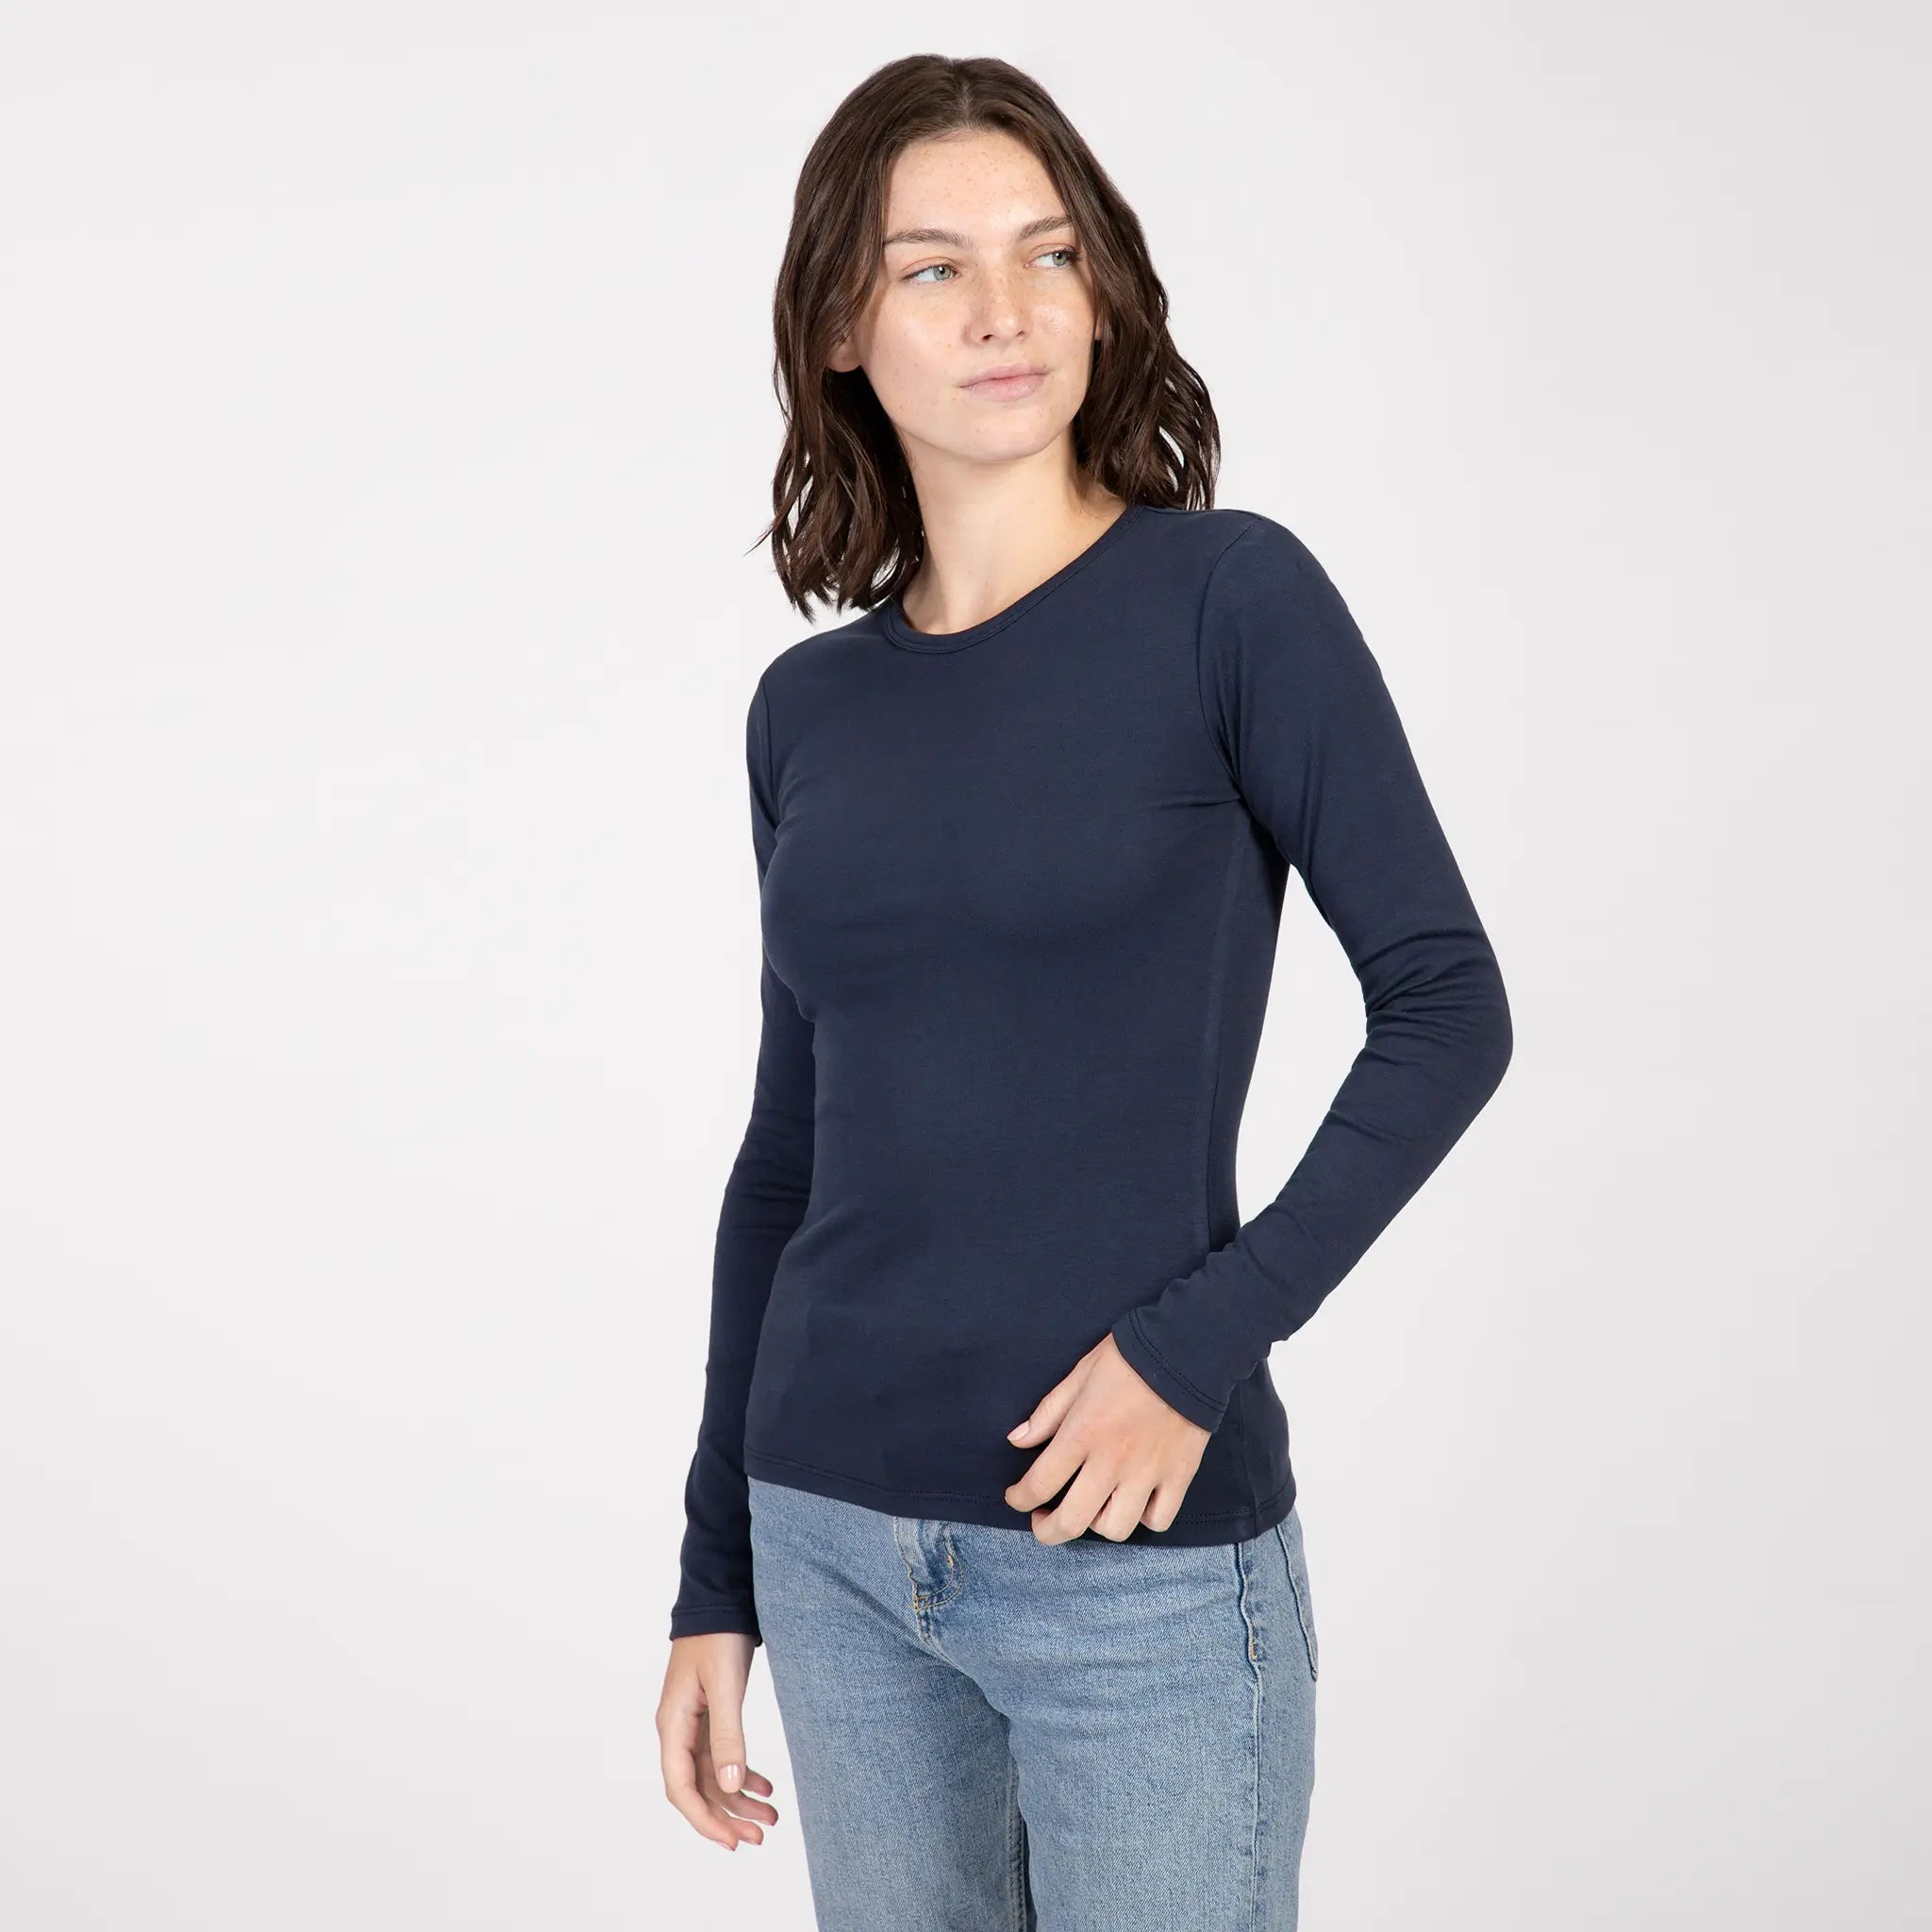 womens all tshirt long sleeve color navy blue